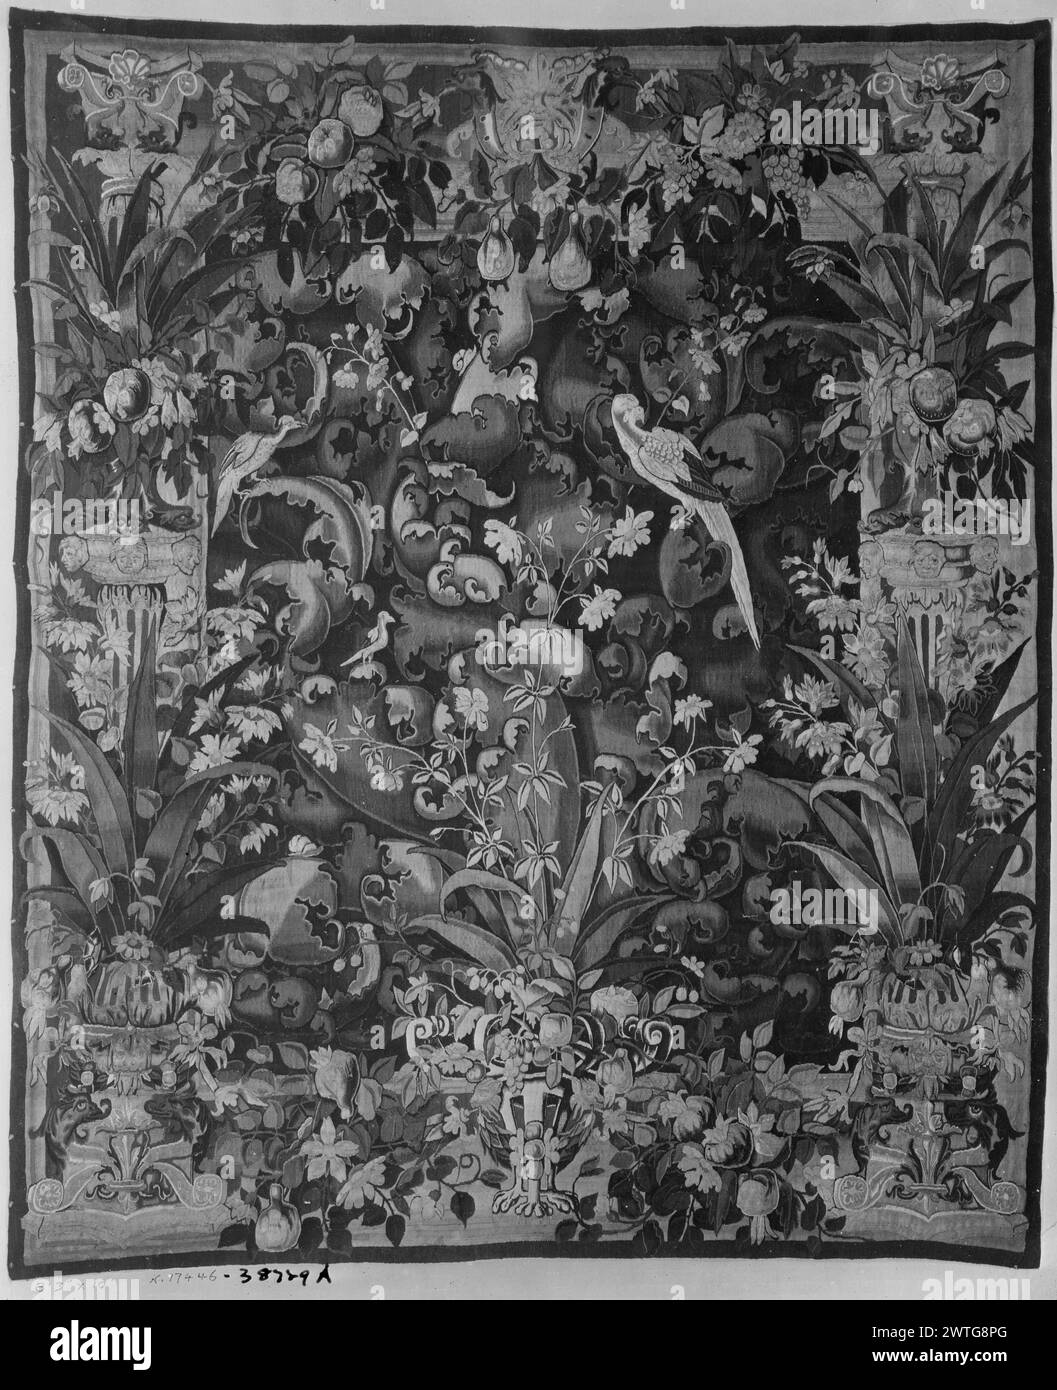 Large-leaf proscenium-verdure with parrot. unknown c. 1550-1600 Tapestry Dimensions: H 10' x W 8'3' Tapestry Materials/Techniques: unknown Culture: Flemish Weaving Center: unknown Ownership History: French & Co. purchased from Sumner Healy, invoiced 3/22/1932; sold to Rhode Island School of Design 5/24/1945. Proscenium incorporated into border; greenery composed of wispy flowering plants amidst scrolling acanthus-like leaves inhabited by large parrot & other birds (BRD) foliate impinging on central field; (L & R BRD) columns ornamented by foliage, fruit & flowers; (UPR BRD) central mask flanke Stock Photo